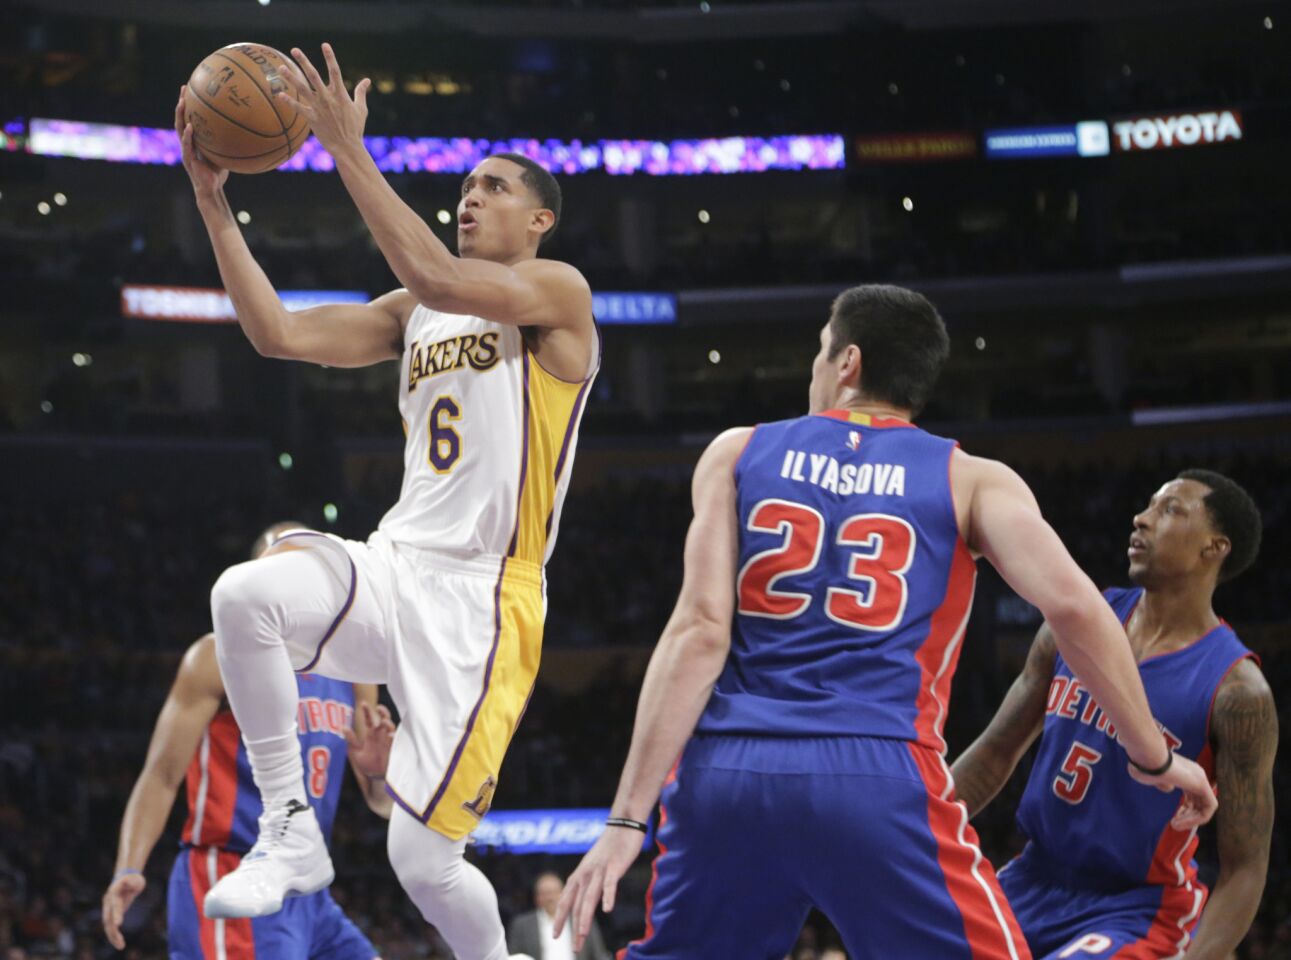 Lakers guard Jordan Clarkson goes up for a finger roll layup against the Pistons forward Ersan Ilyasova in the first half.